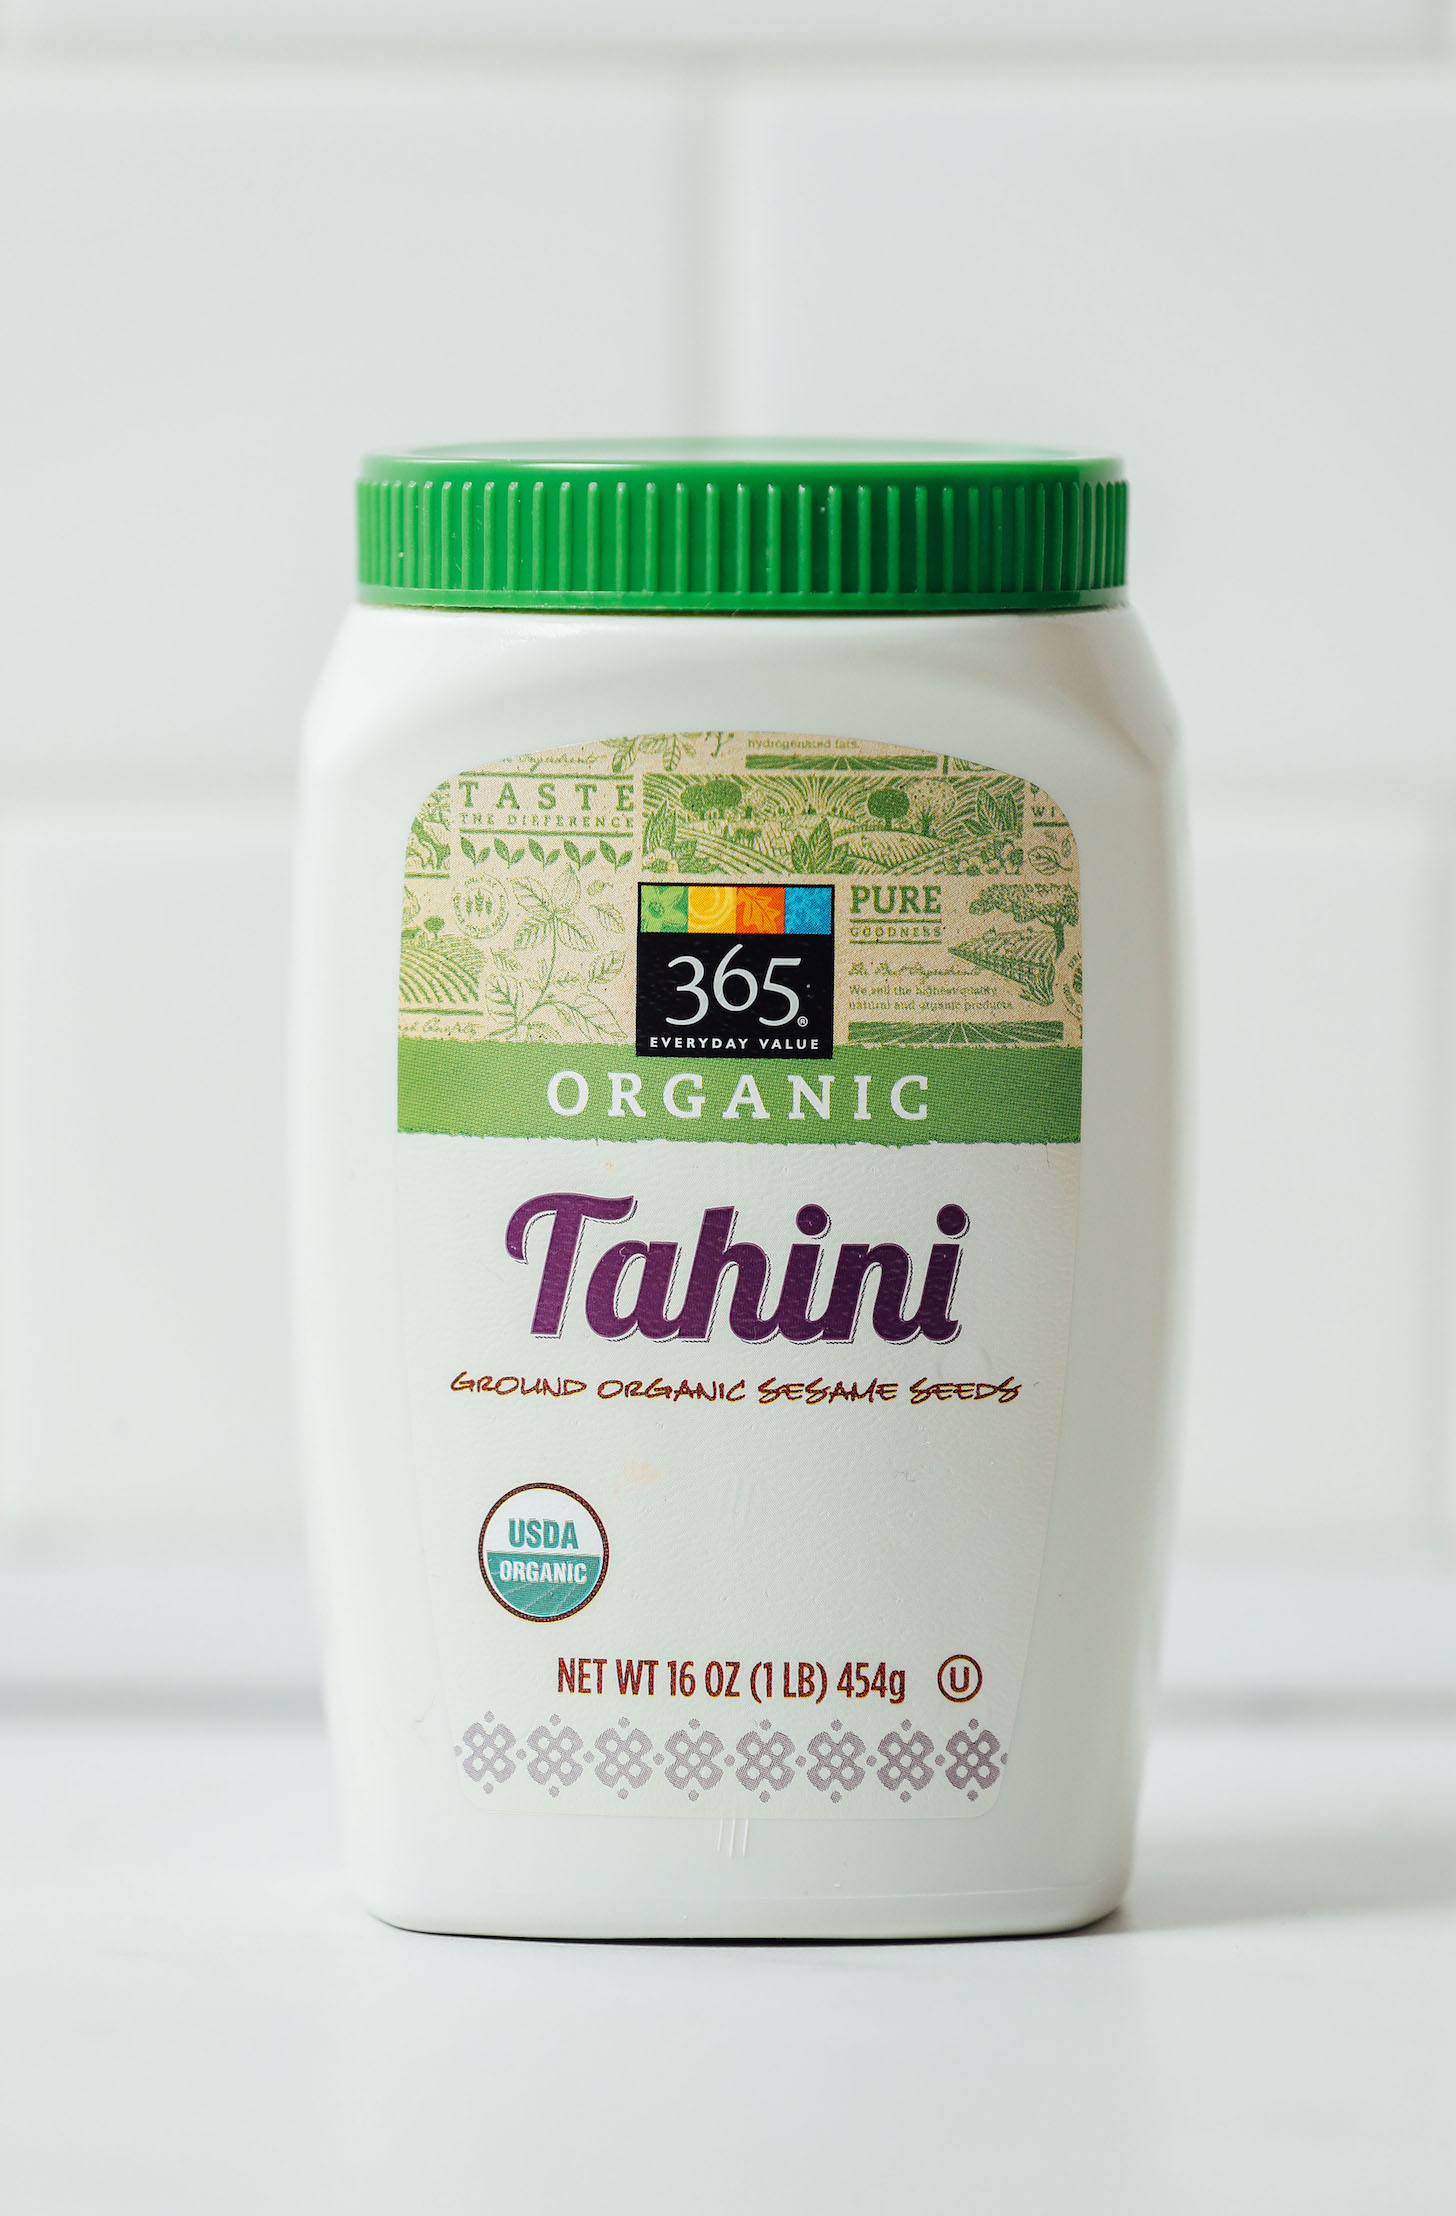 Jar of Whole Foods Tahini for our review of the Best Brands of Tahini